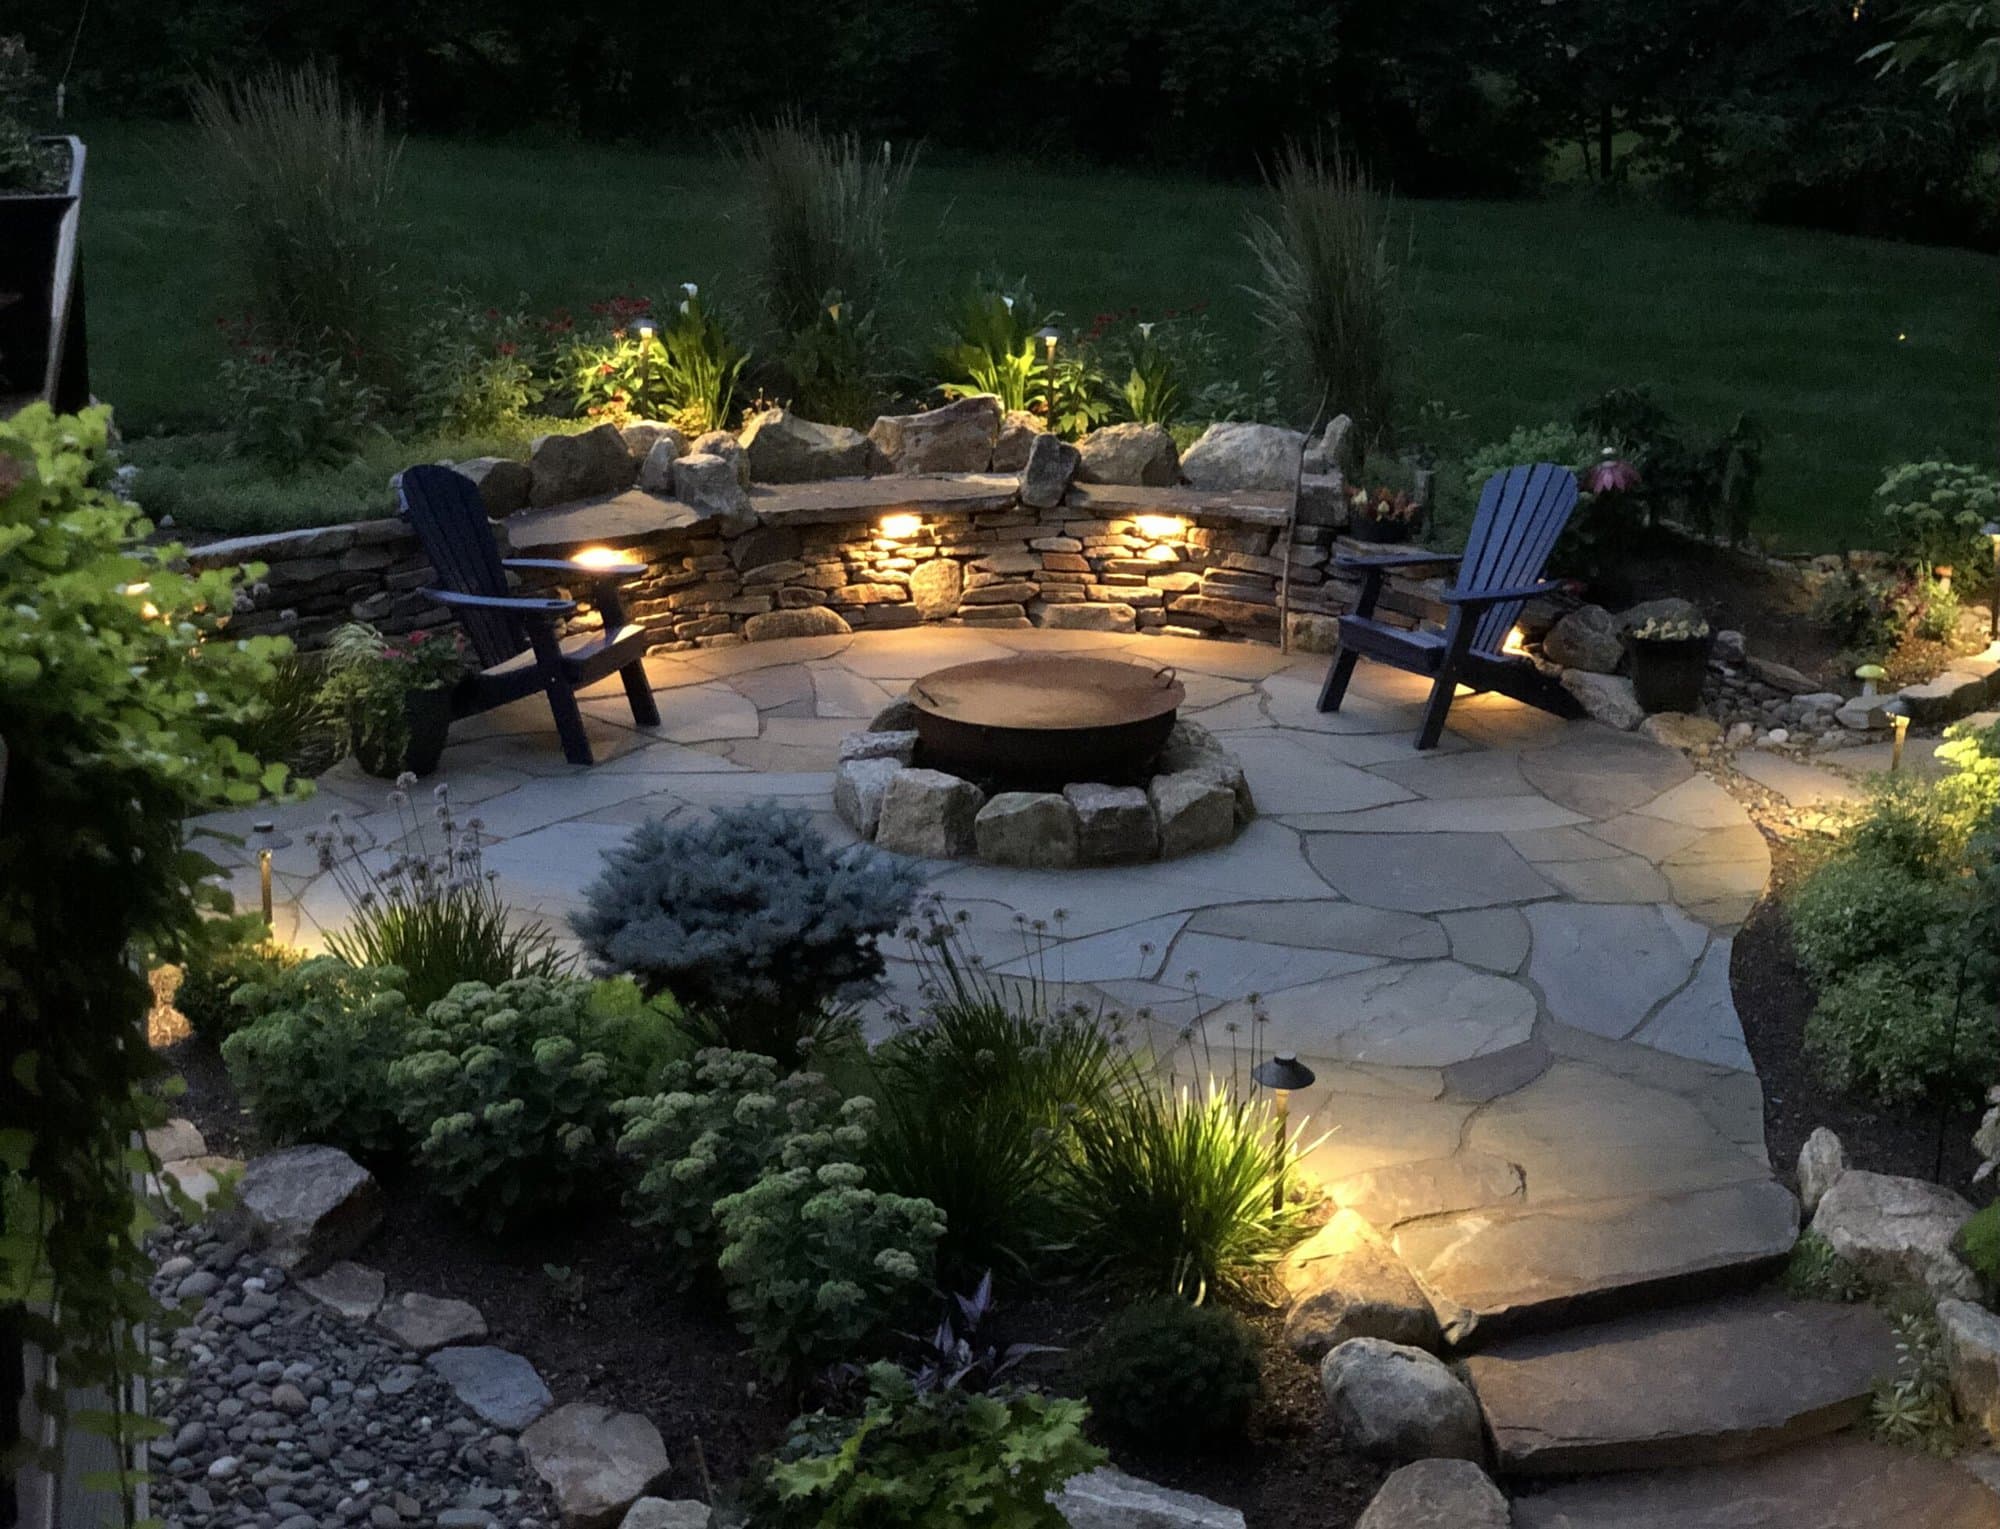 A beautiful, inviting outdoor living space in Pottstown, PA with flagstone patio, sitting wall, outdoor lighting and landscaping.